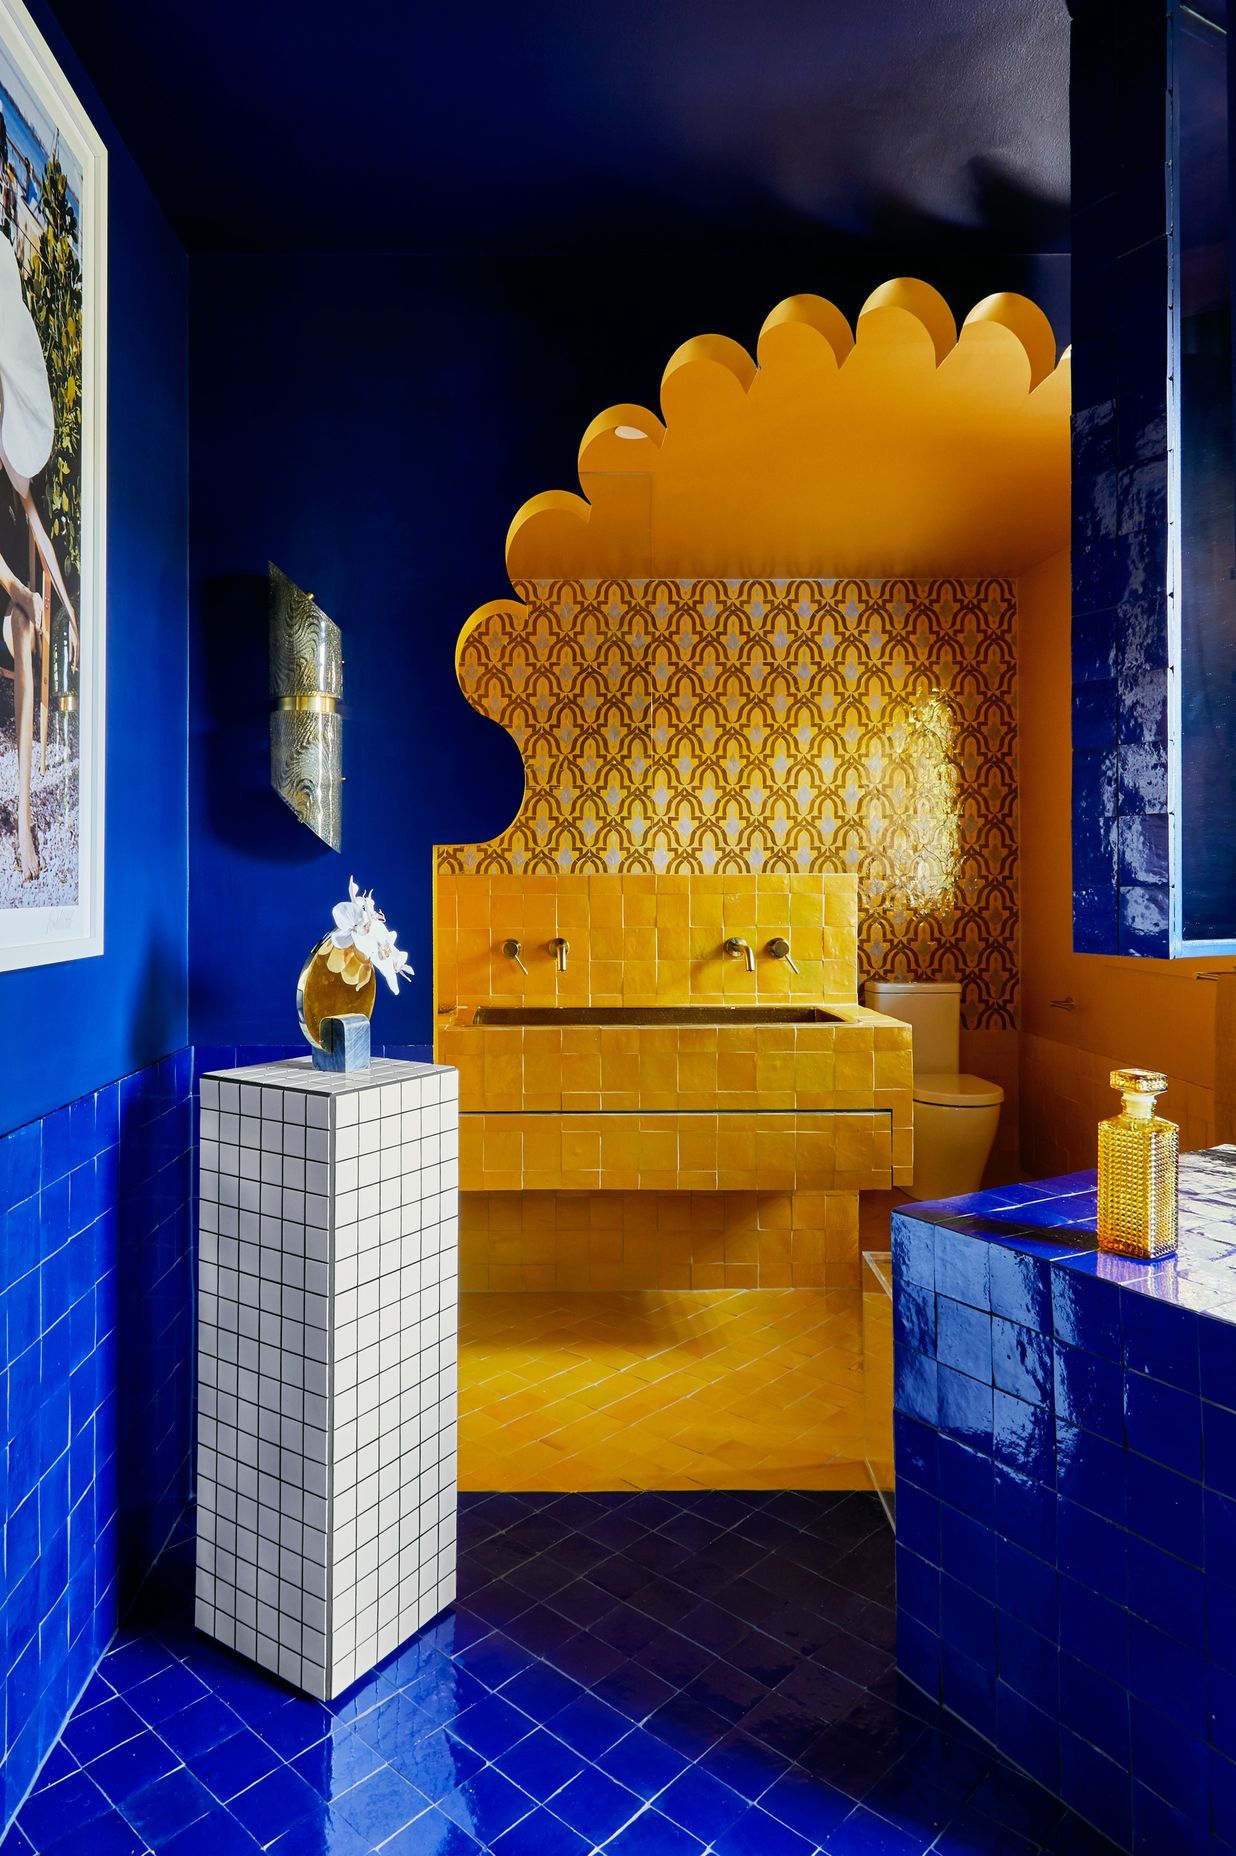 Morocco Goes Mod by Tiles of Ezra | Photography by Amelia Stanwix